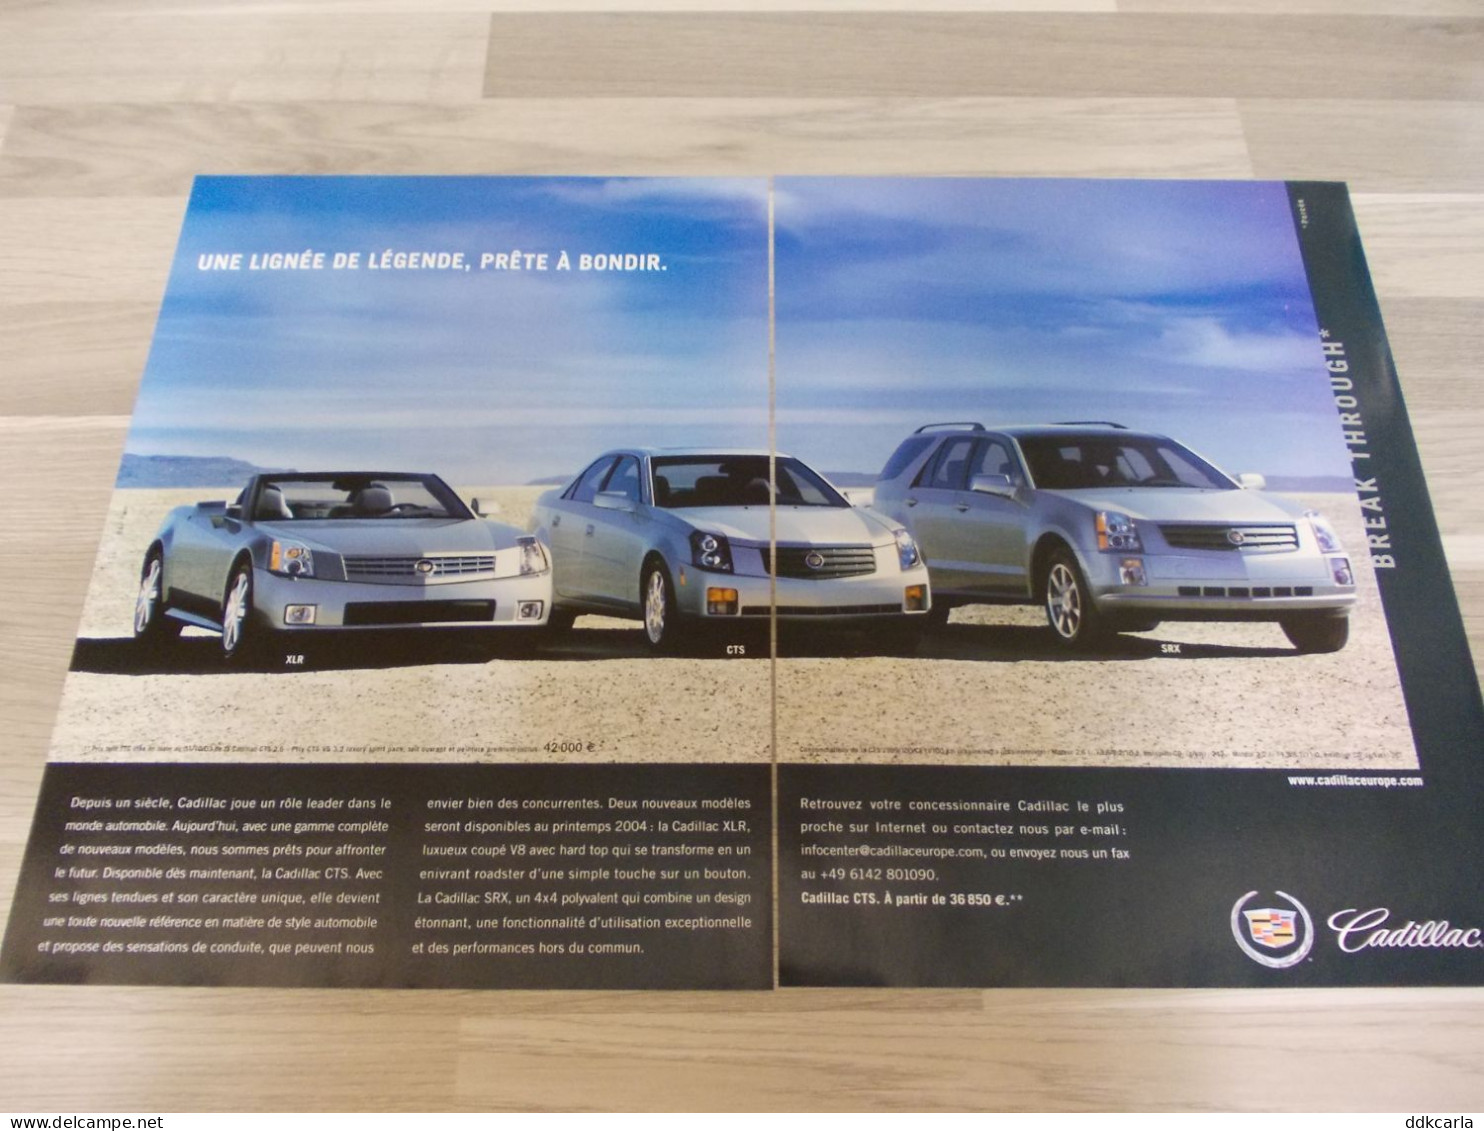 Reclame Advertentie Uit Oud Tijdschrift 2003 - Cadillac CTS - Cadillac XLR - Cadillac SRX 4X4 - Advertising